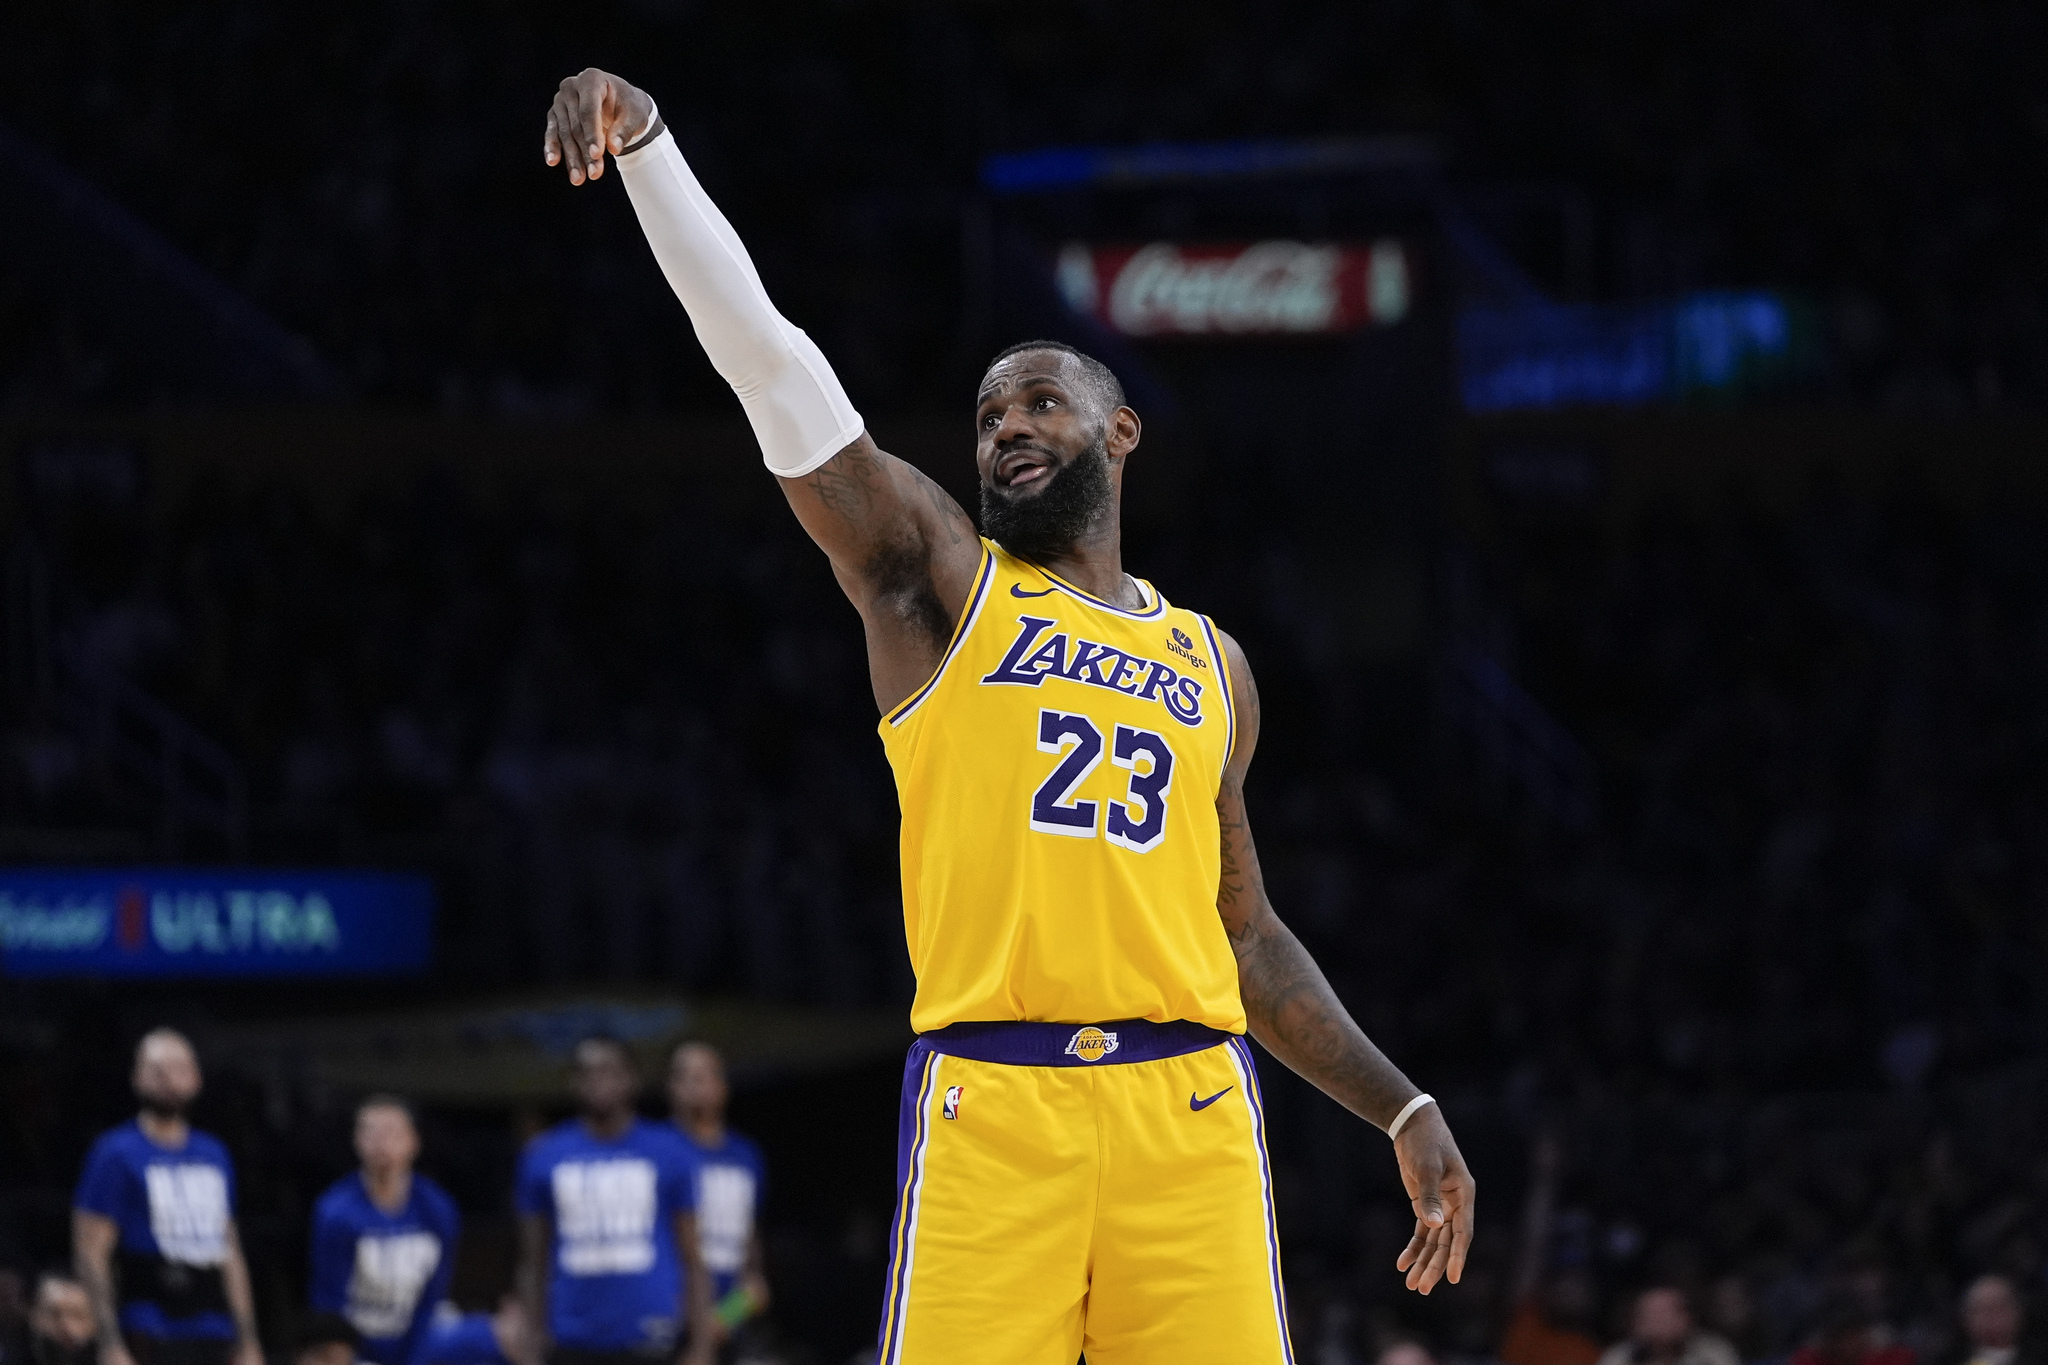 Los Angelese Lakers forward LeBron James watches a shot